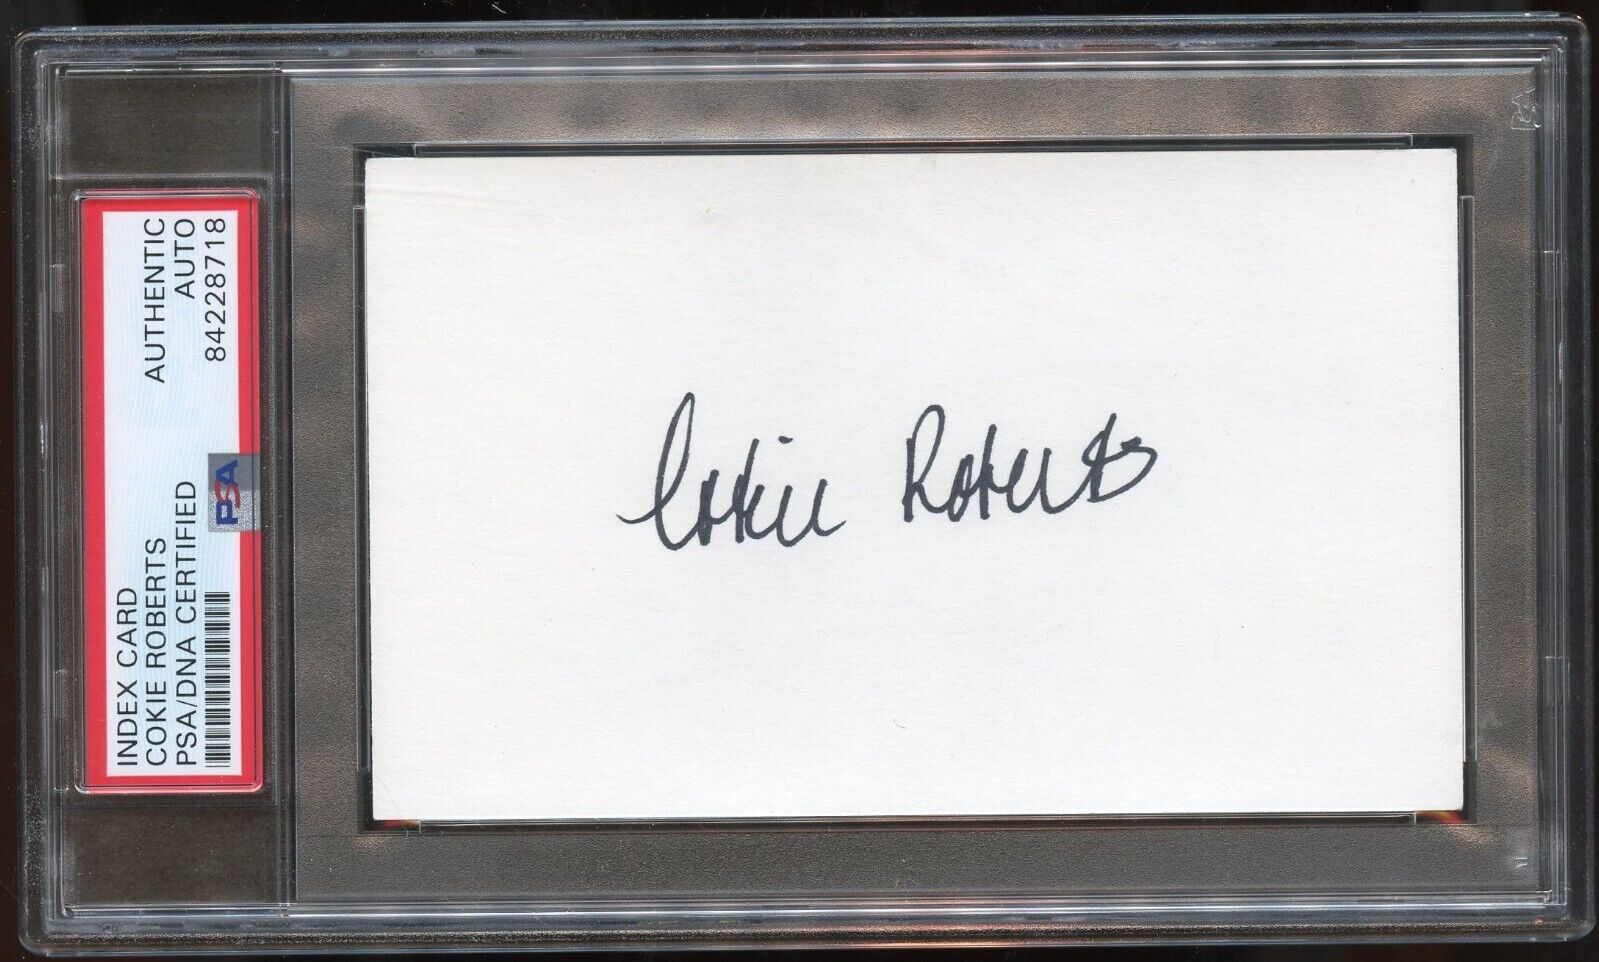 Cokie Roberts d2019 signed autograph auto 3x5 card American Journalist & Author